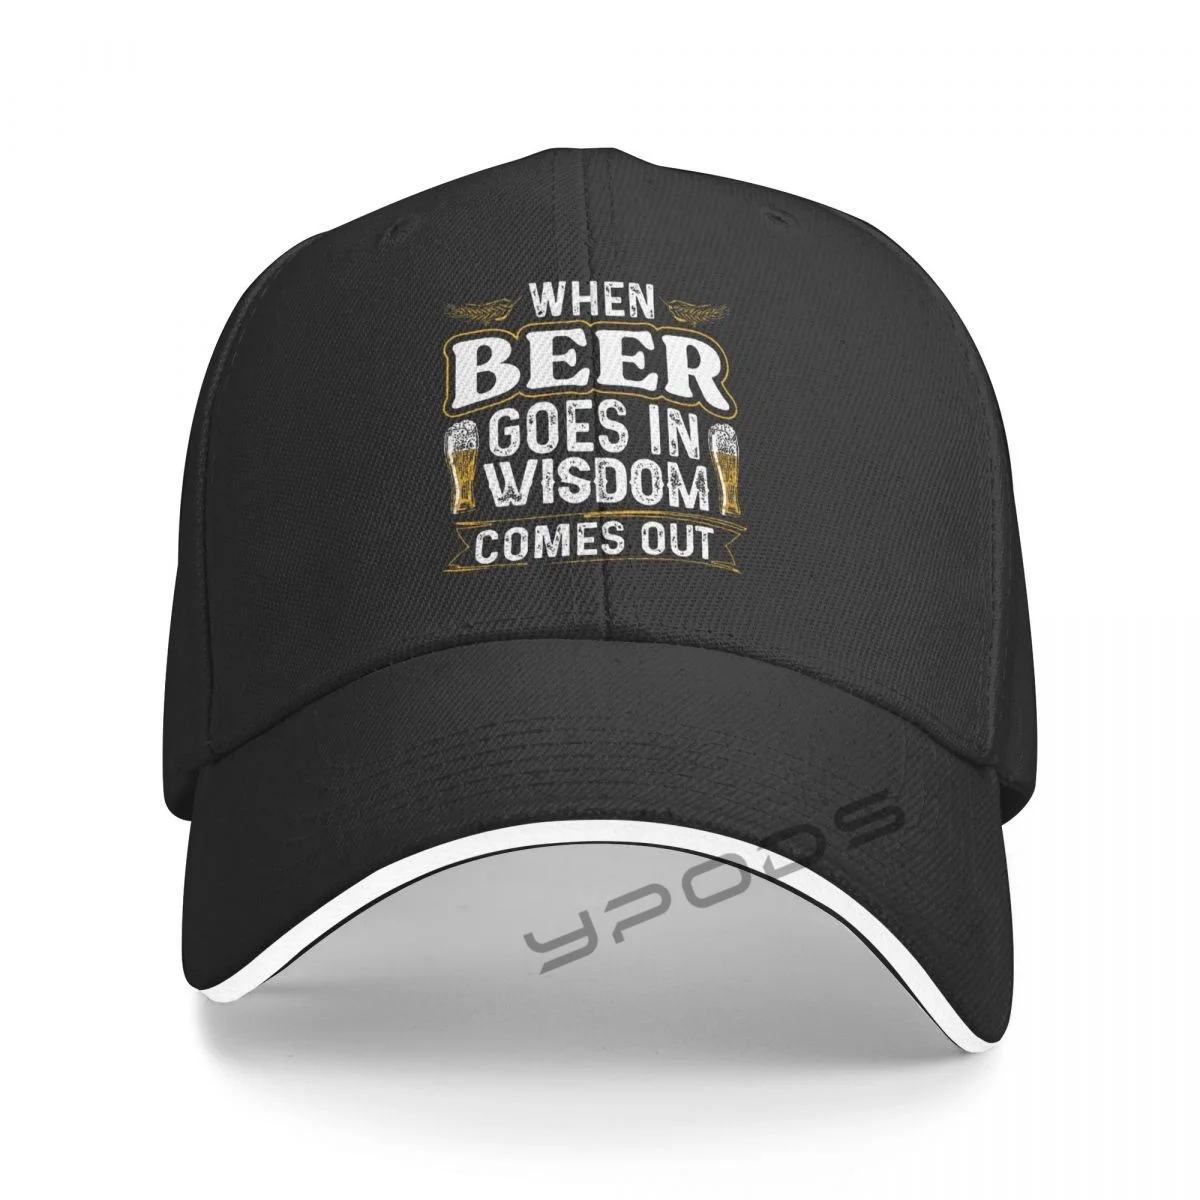 

When Beer Goes In Wisdom Comes Out 2 Men's New Baseball Cap Fashion Sun Hats Caps for Men and Women